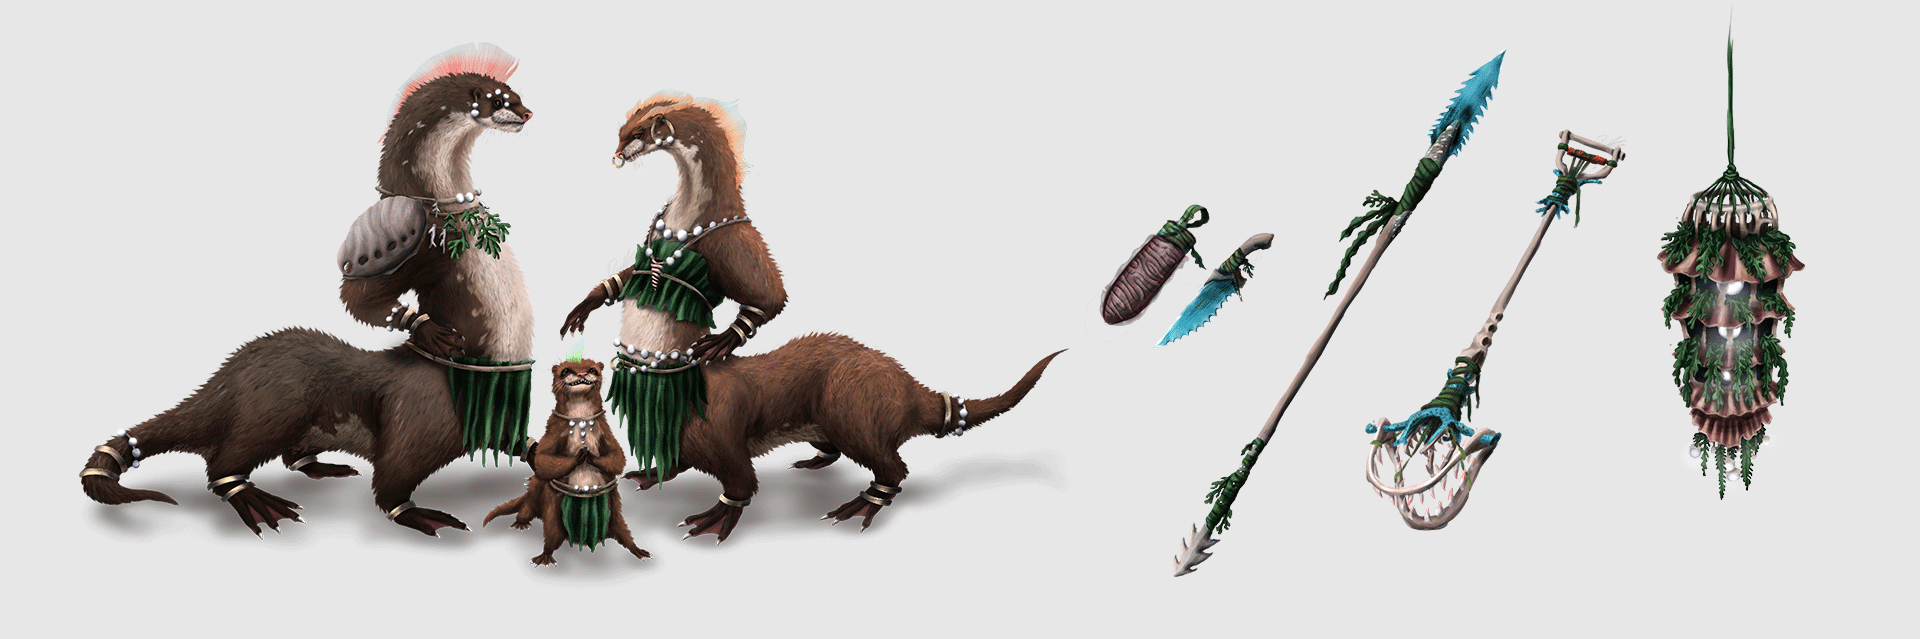 A GIF switches between two images. The first image shows painted concepts of the Otteroids, and a knife, spear, grabber, and light. The next image is an assembly of sketches for the Otteroids, and tools (or props).